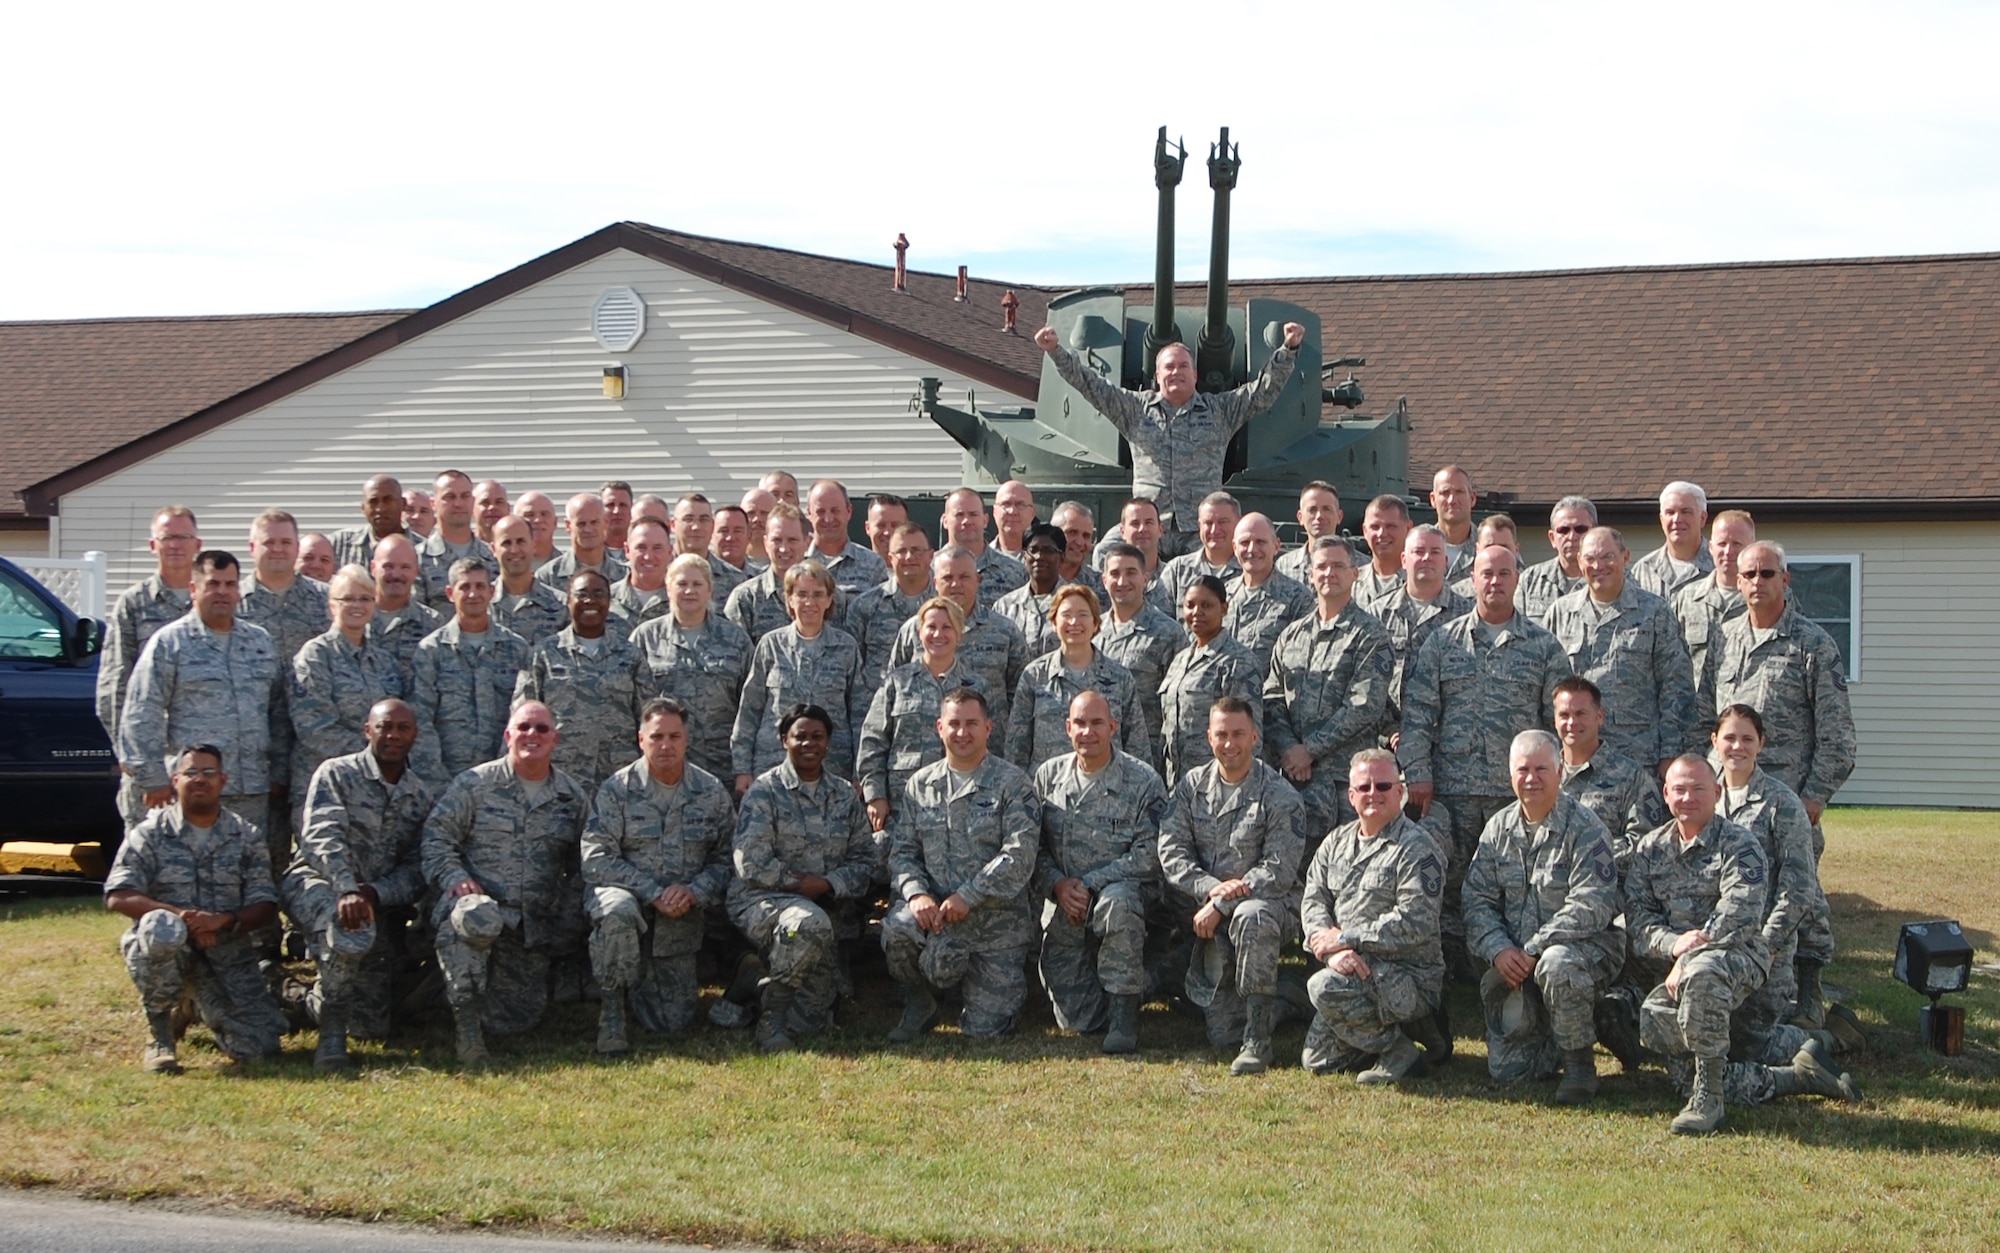 Delaware Air National Guard senior enlisted members and officers pose during the inaugural Delaware ANG Senior Enlisted Symposium held Oct. 20, 2014 at the Delaware National Guard's Bethany Beach Training Site, Del. (U.S. Air National Guard photo by Maj. Mickey Kirschenbaum)